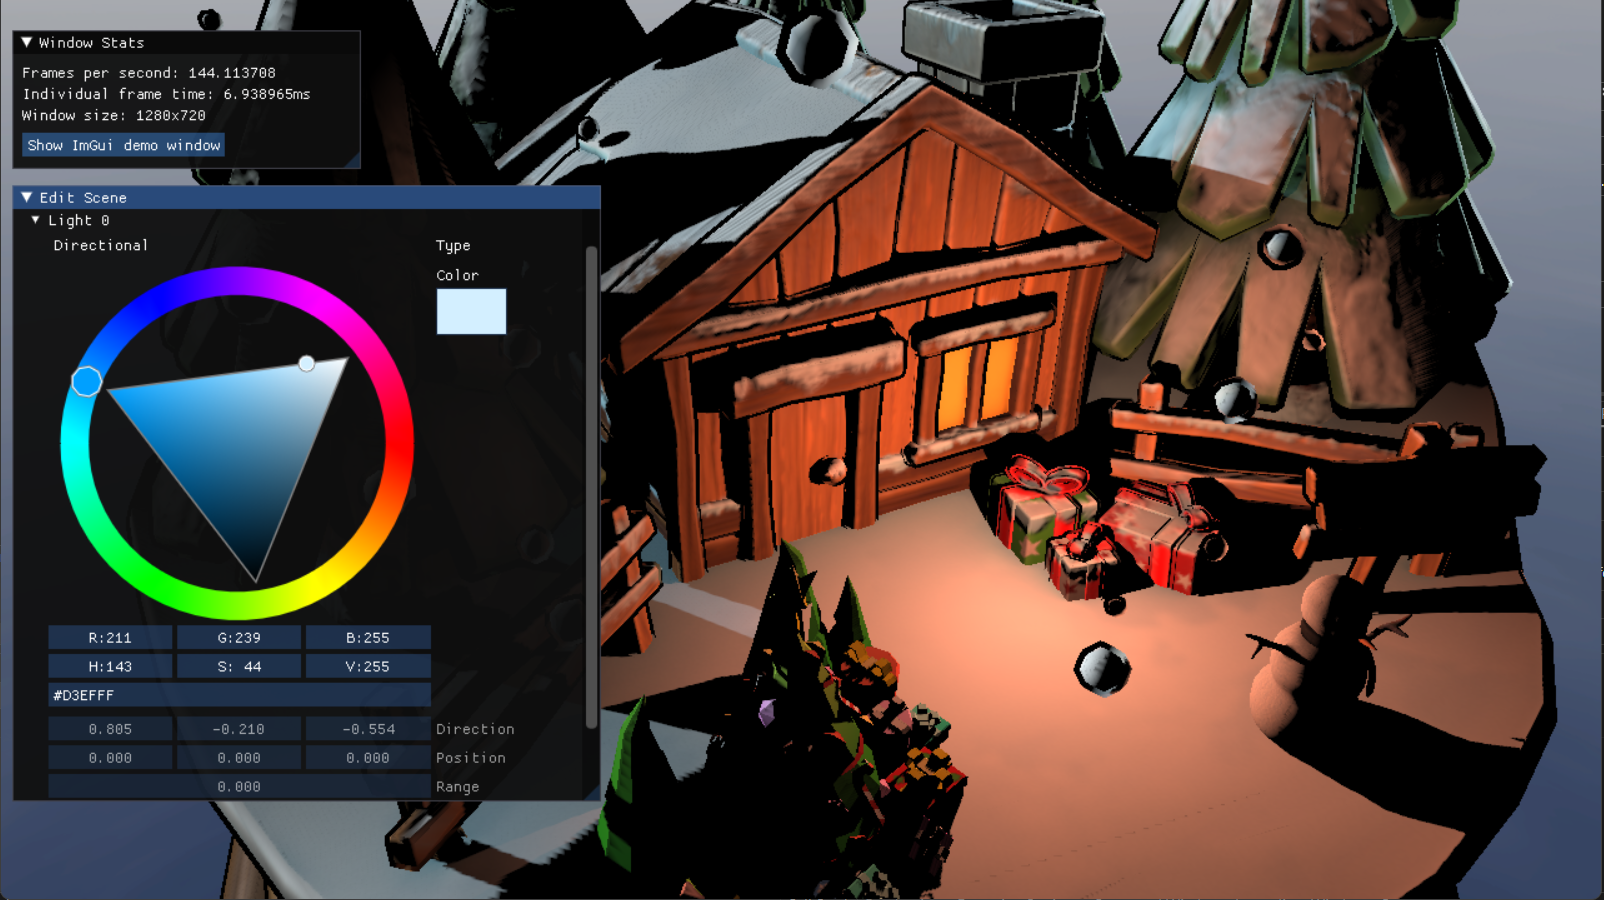 Example of the UI being used to alter lighting in the scene